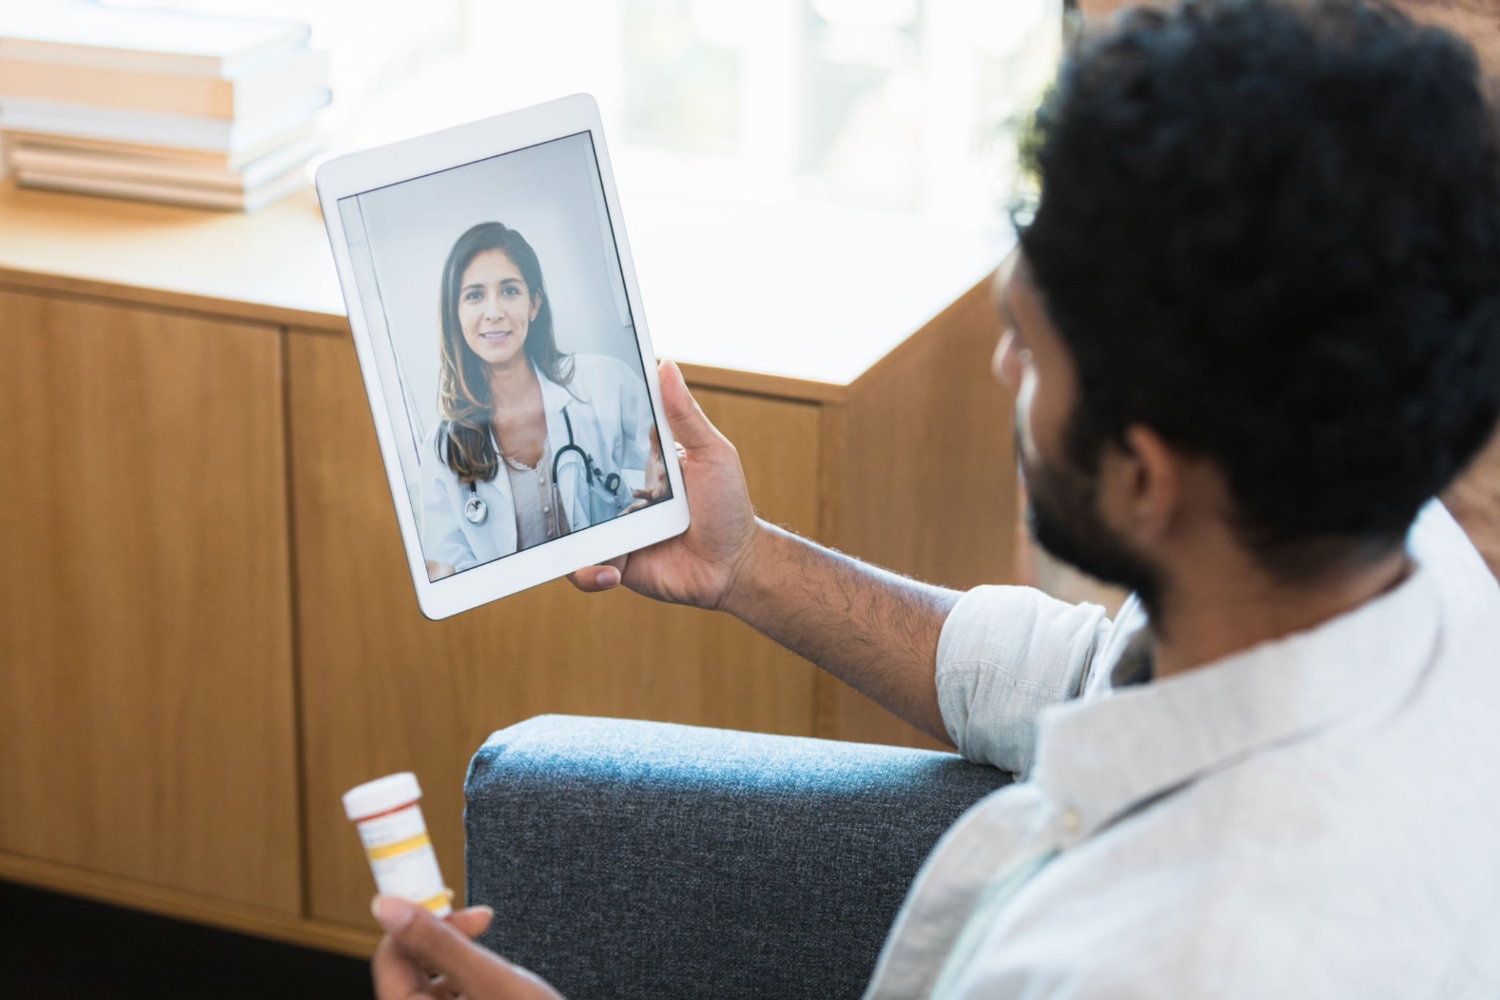 Man talks with doctor via telemedicine appointment